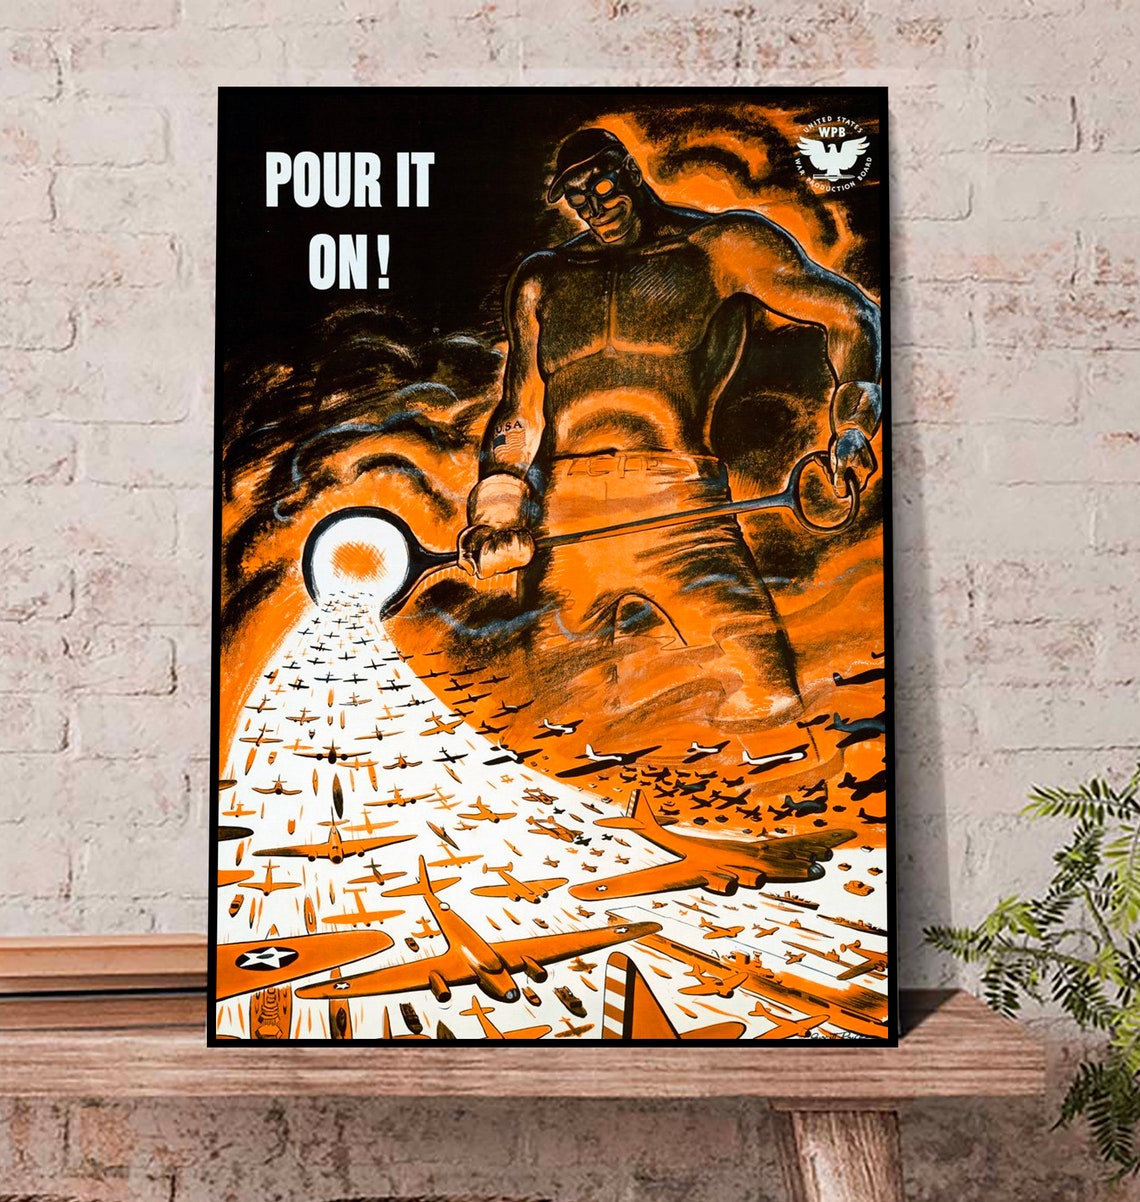 Pour it On WW2 canvas poster, Pour it on war wall Art, Pour it on! – US World War Two poster